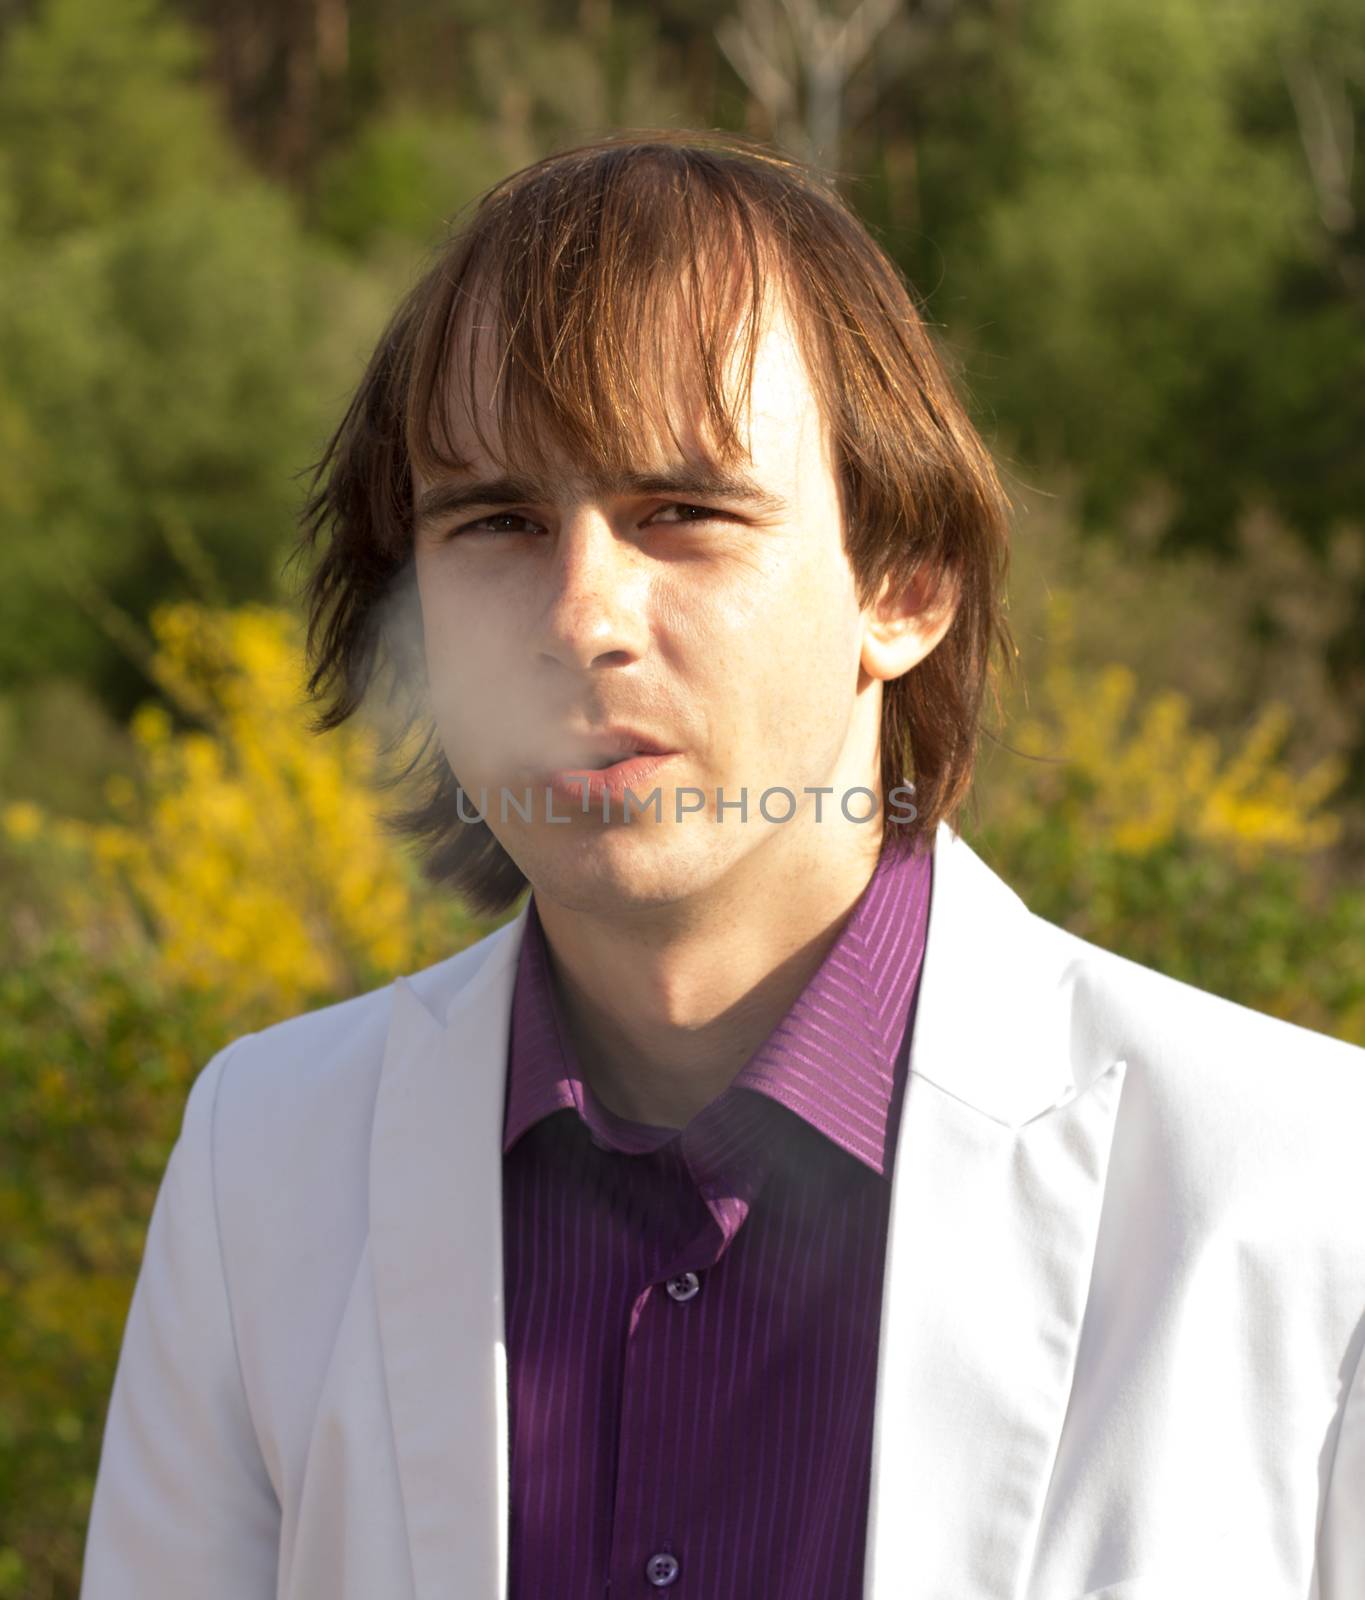 Young and handsome man smoking cigarette. For your commercial and editorial use.